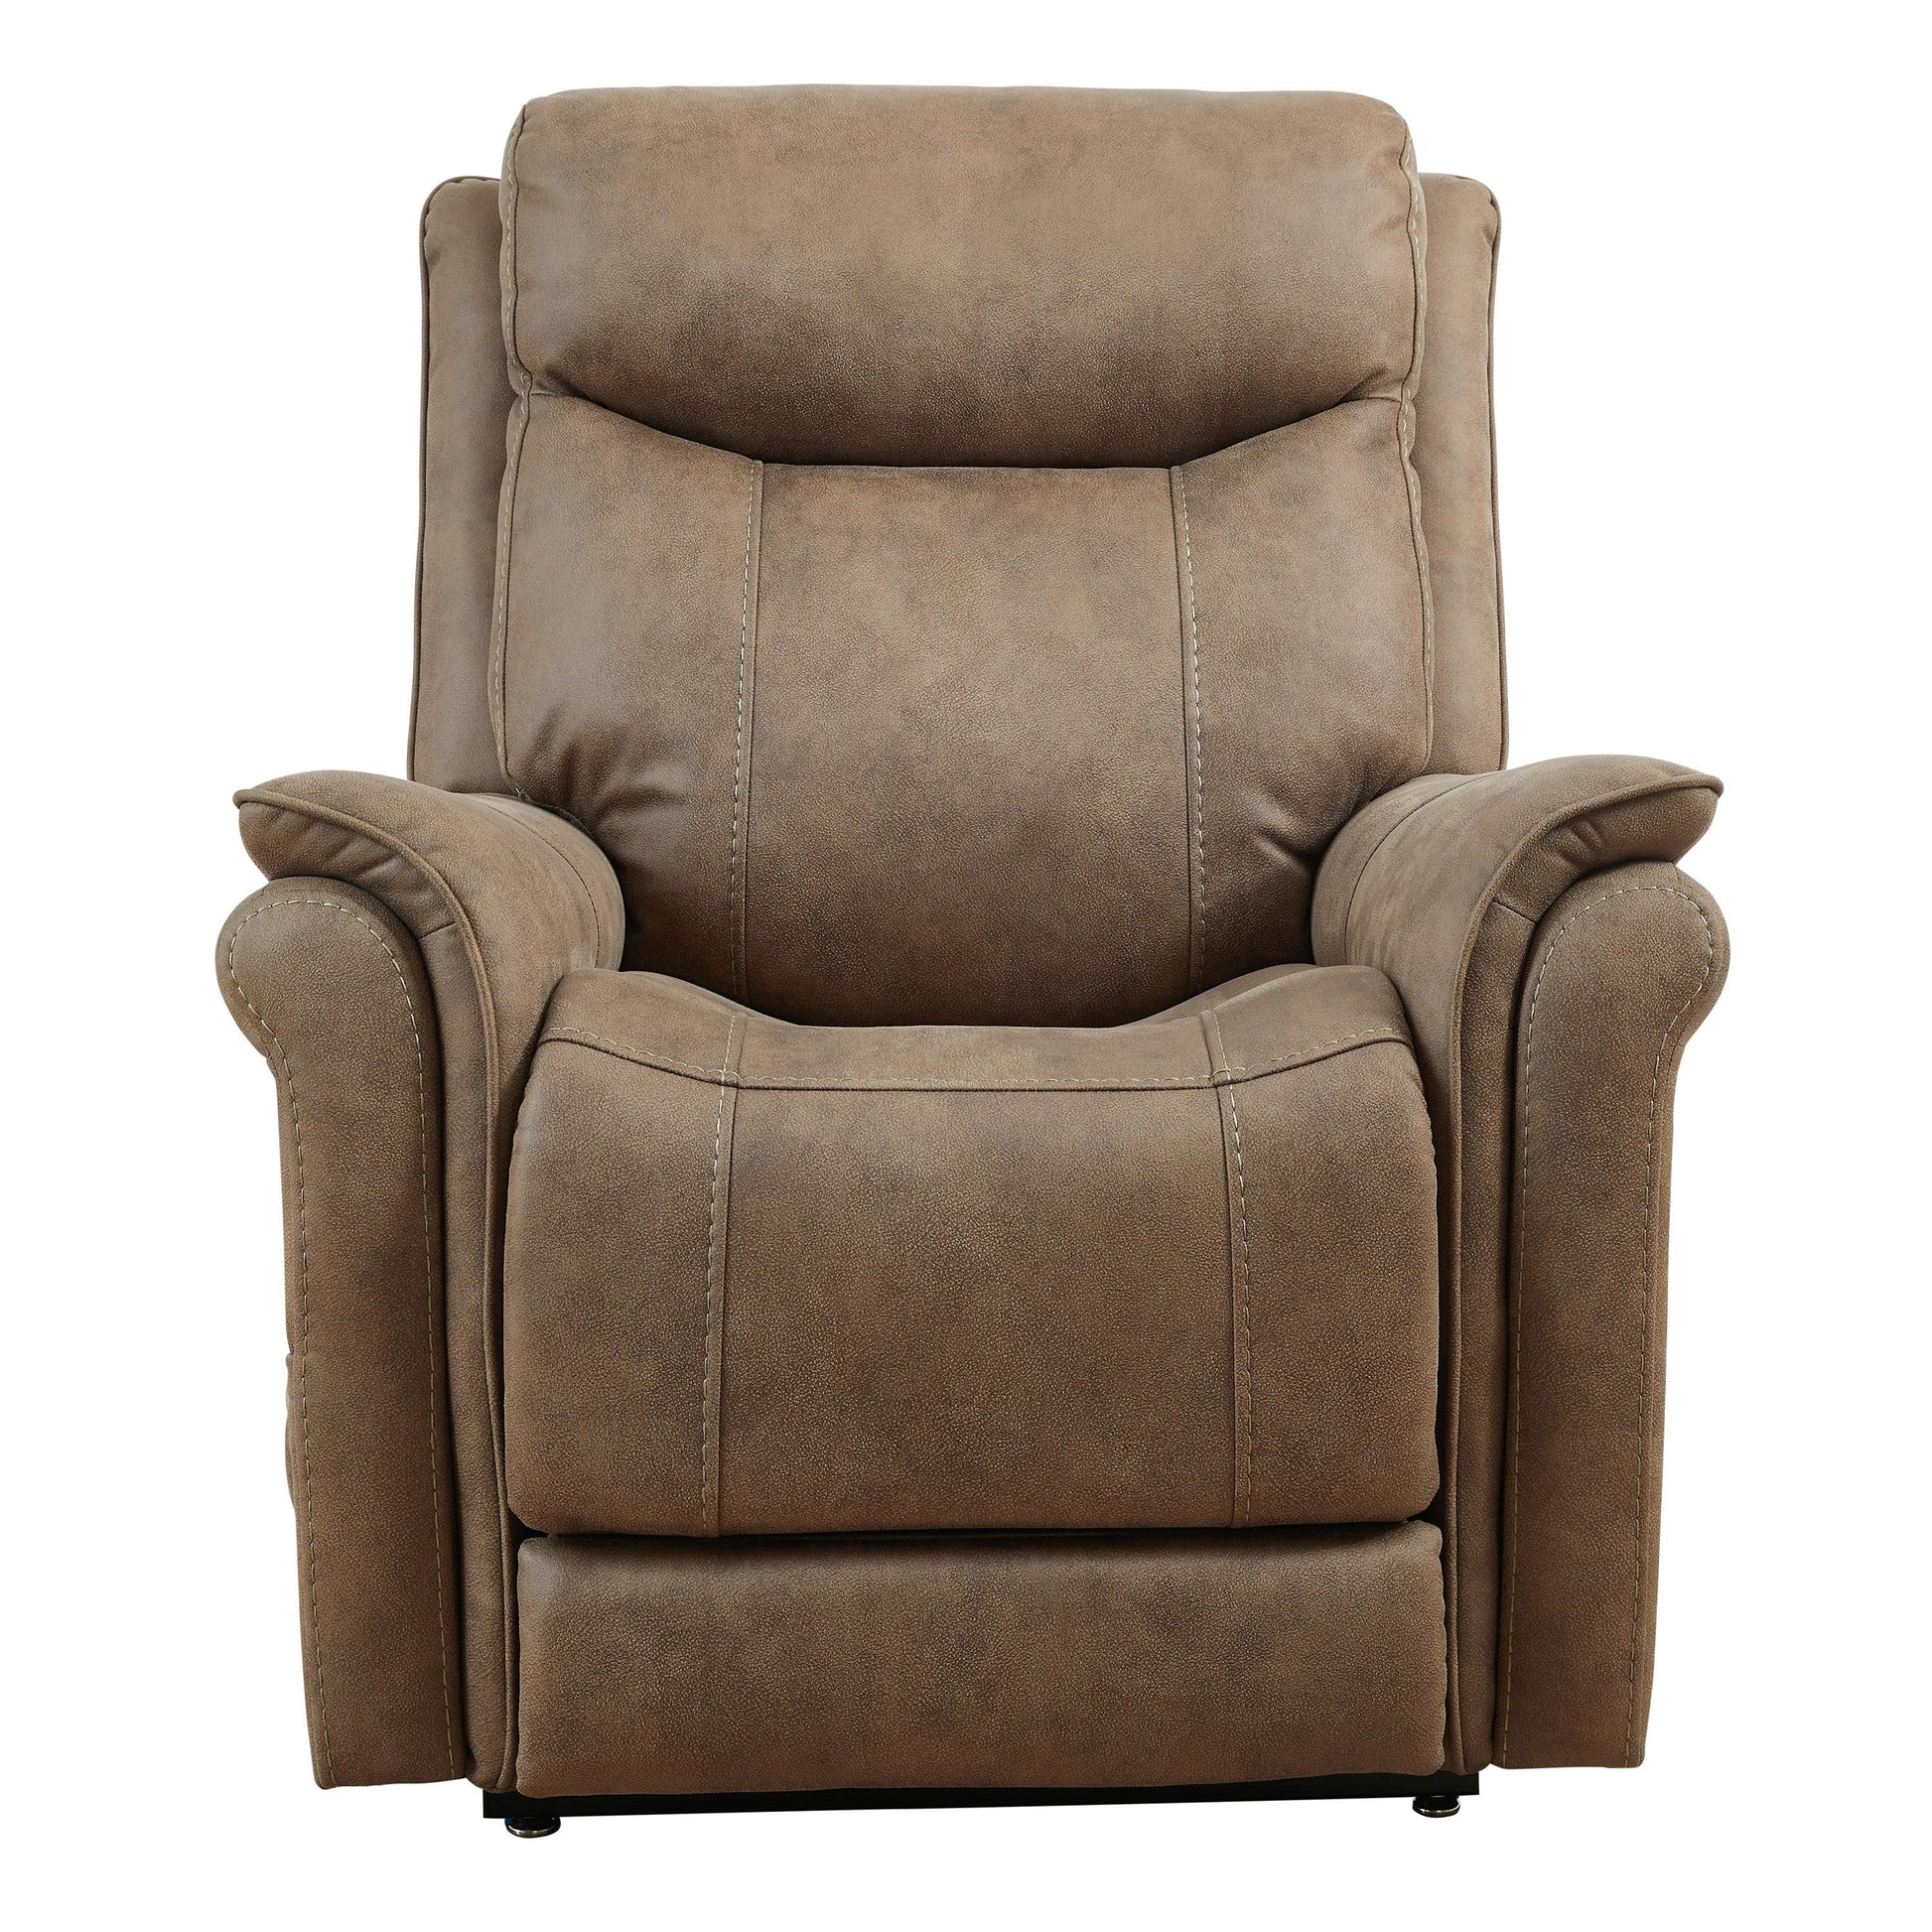 Signature Design by Ashley Lorreze Fabric Lift Chair with Heat and Massage 8530612 IMAGE 4